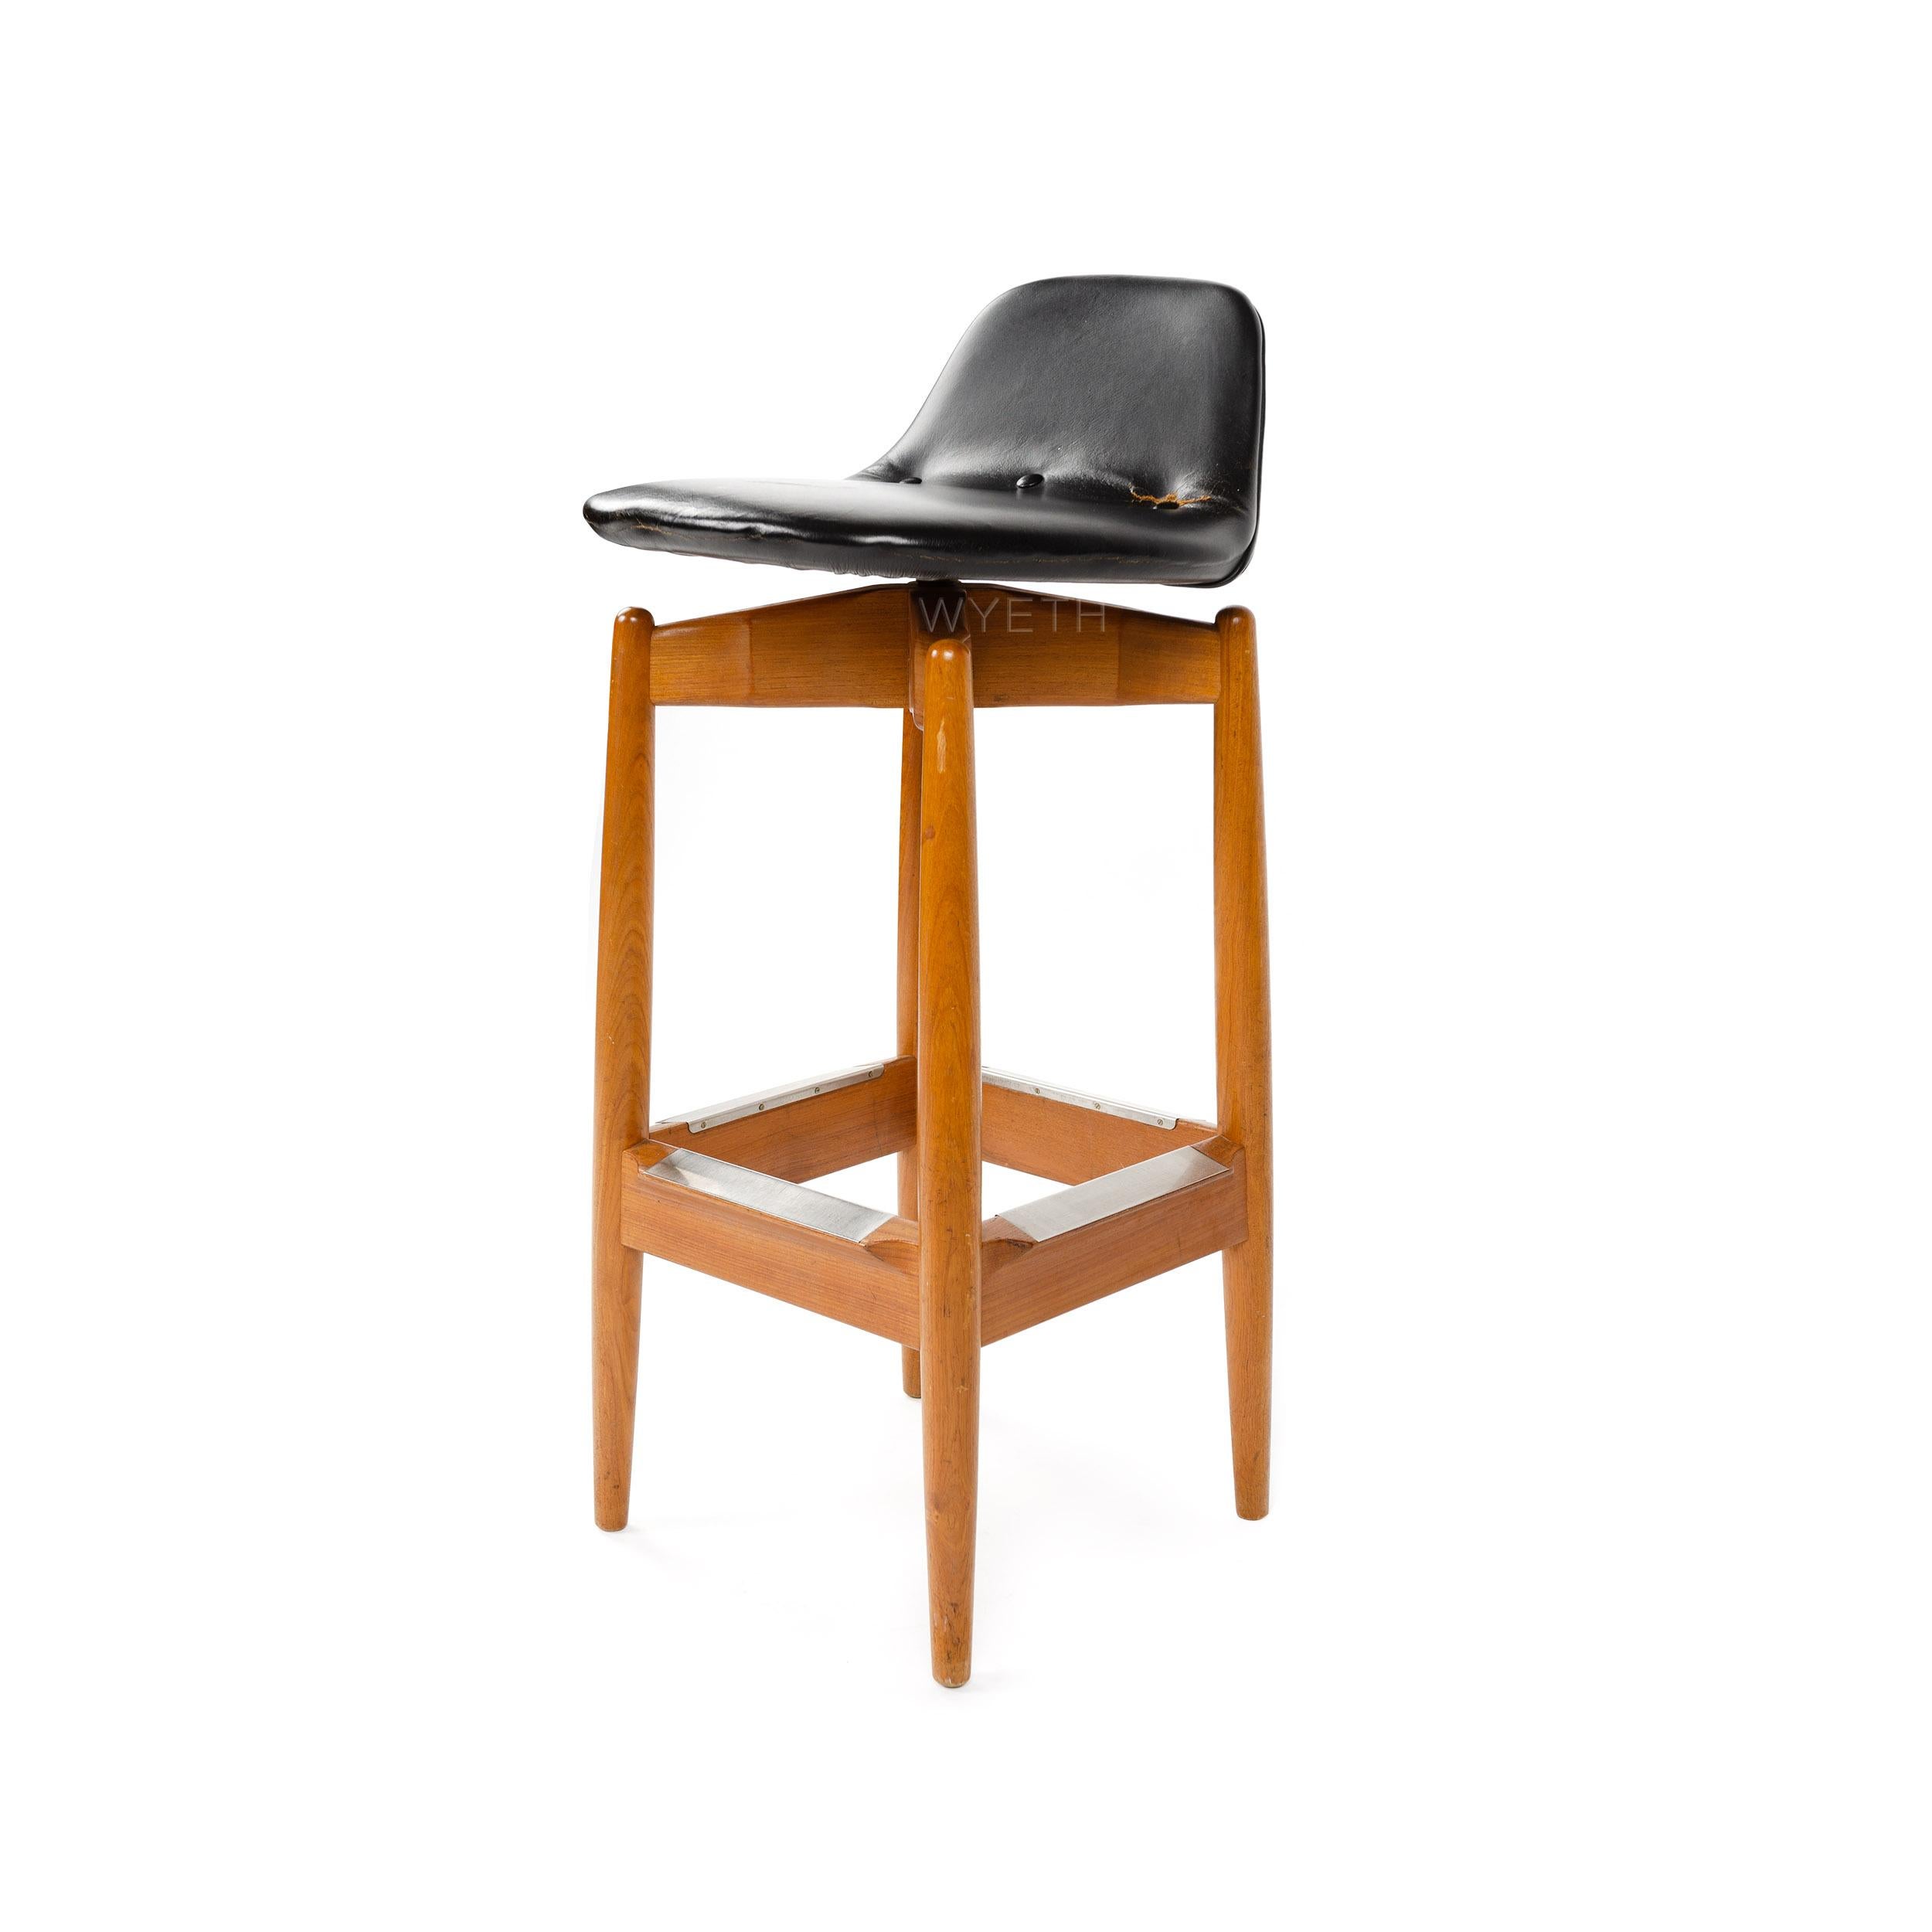 A teak barstool with a leather swivel seat.